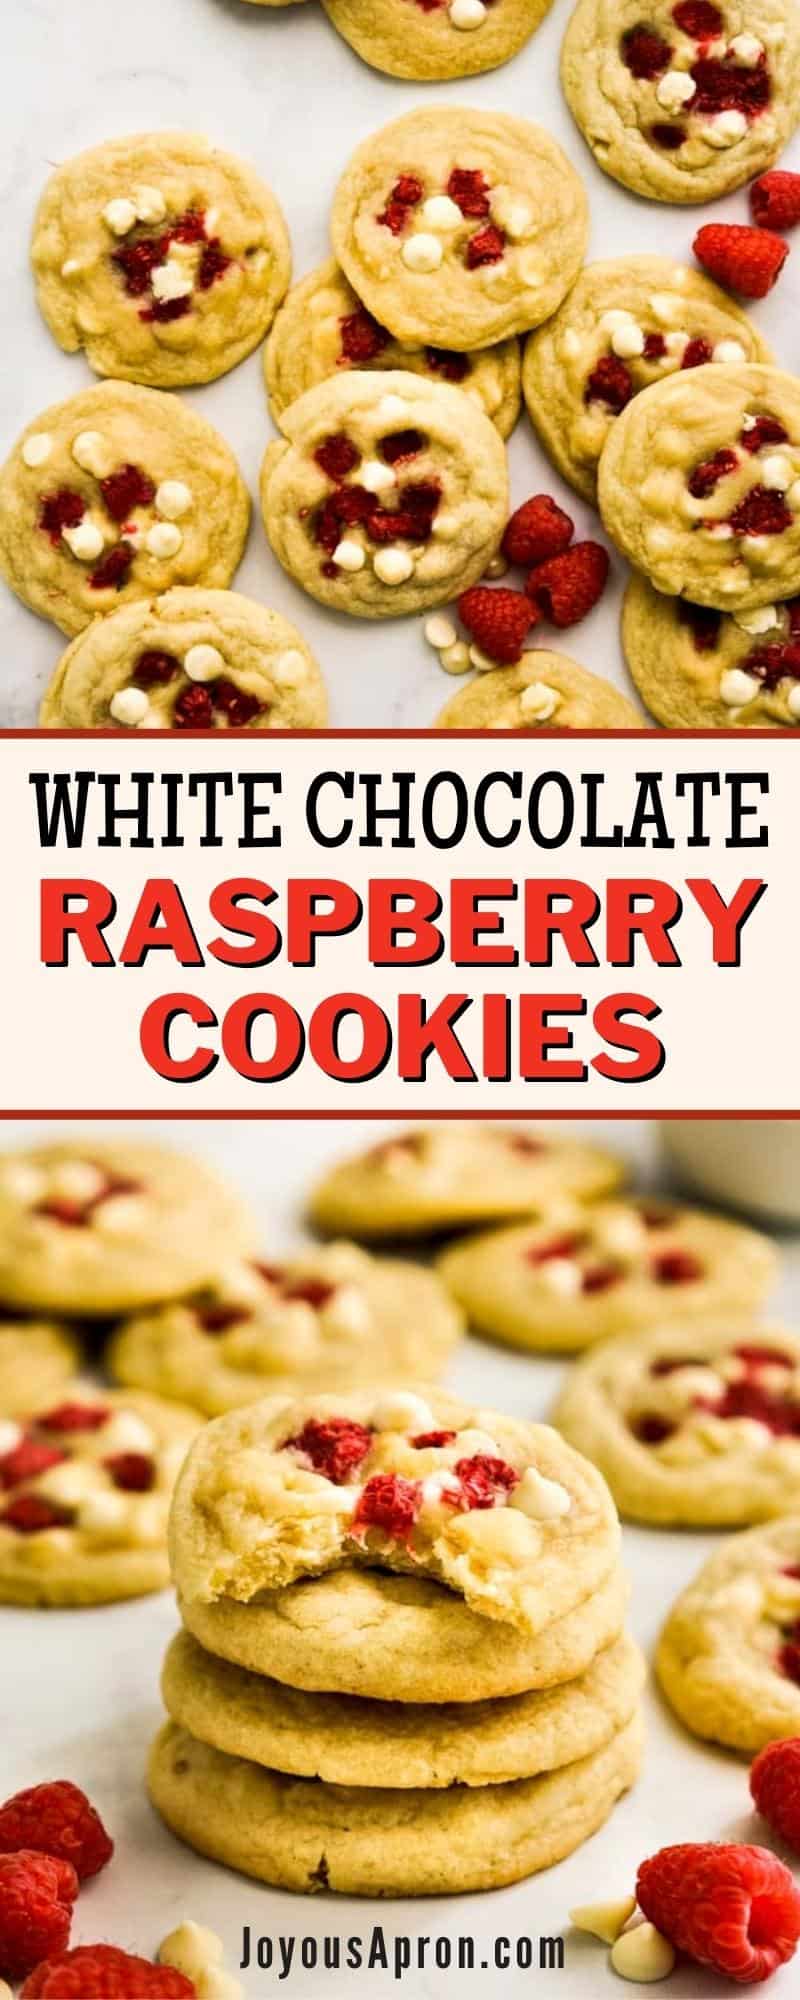 White Chocolate Raspberry Cookies - Soft and chewy festive cookies loaded with raspberry and white chocolate chips. Easy and perfect for Christmas holiday baking! via @joyousapron